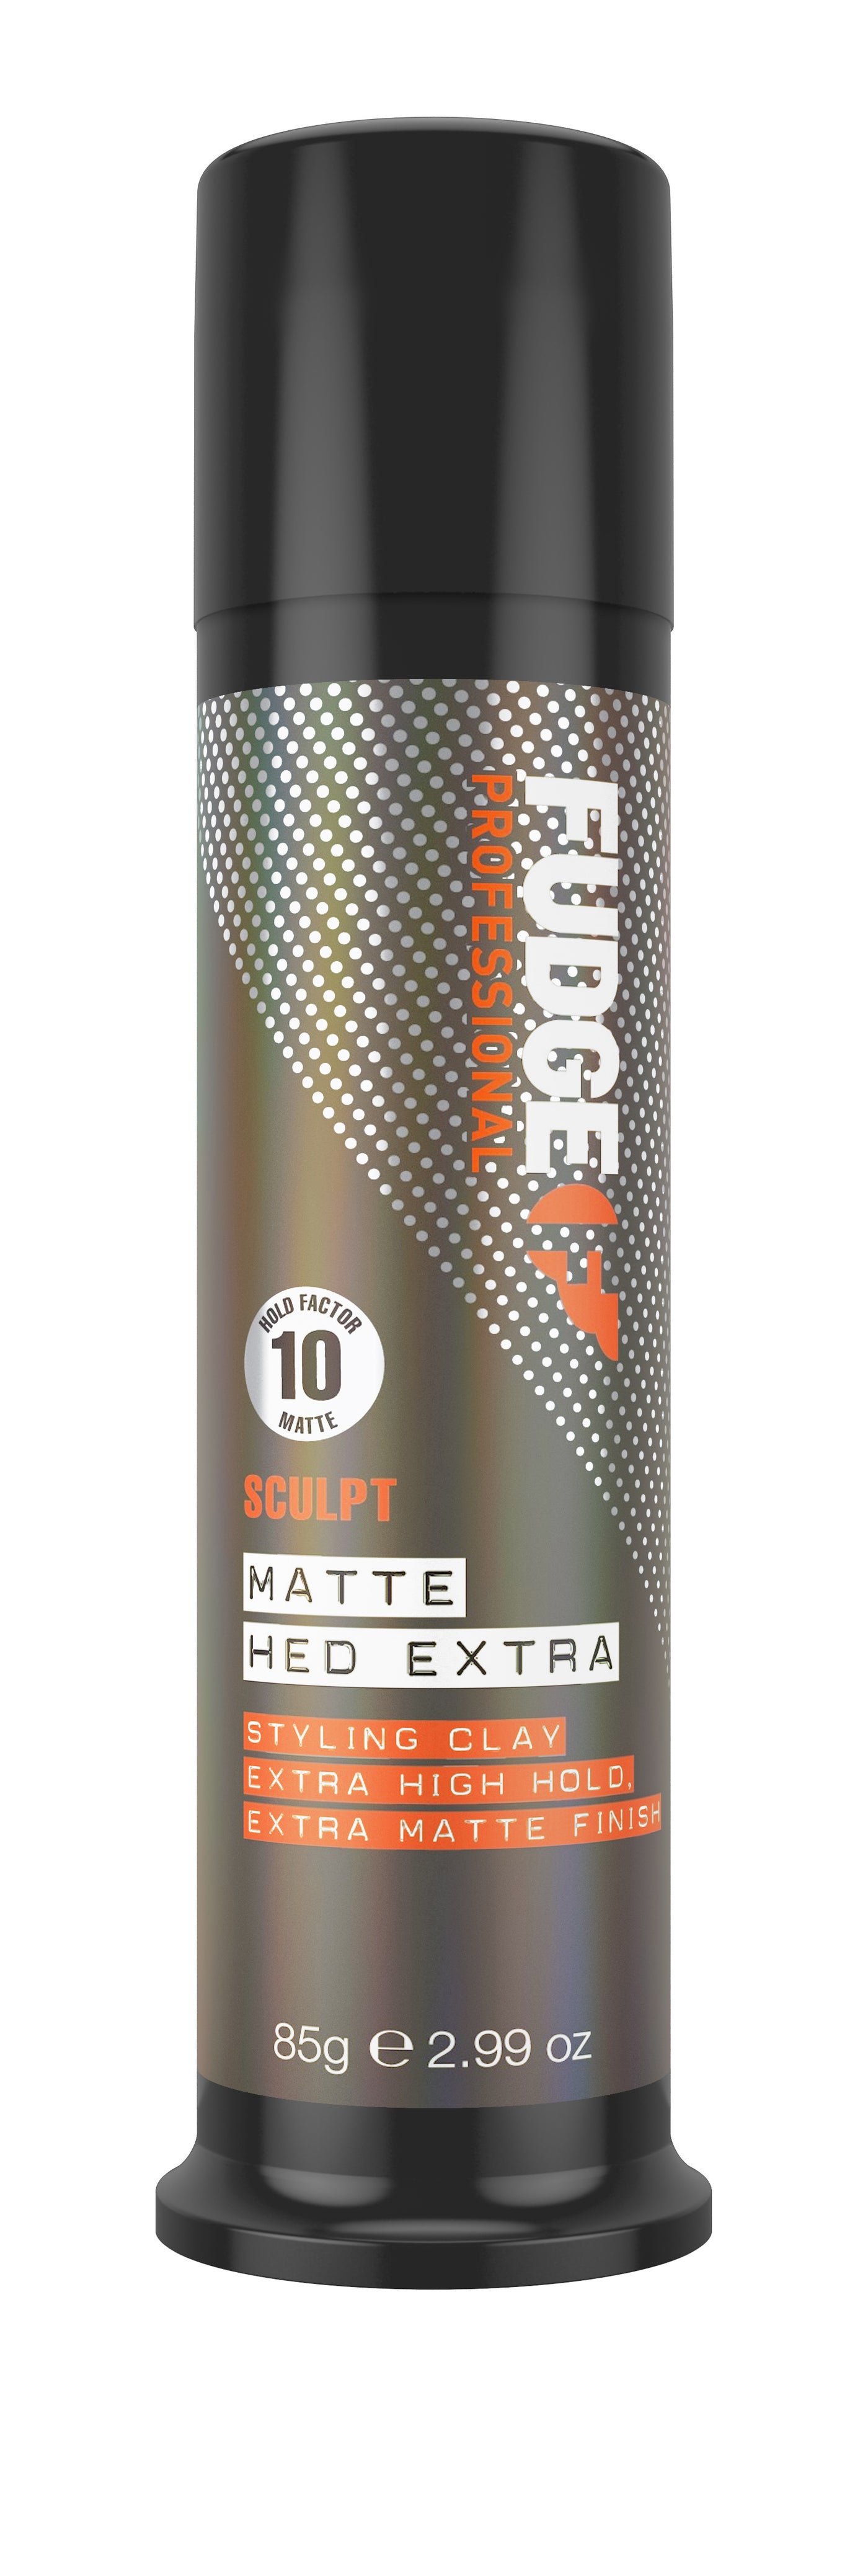 MATTE HED EXTRA Strong Hold Texture Wax  - Salon Warehouse